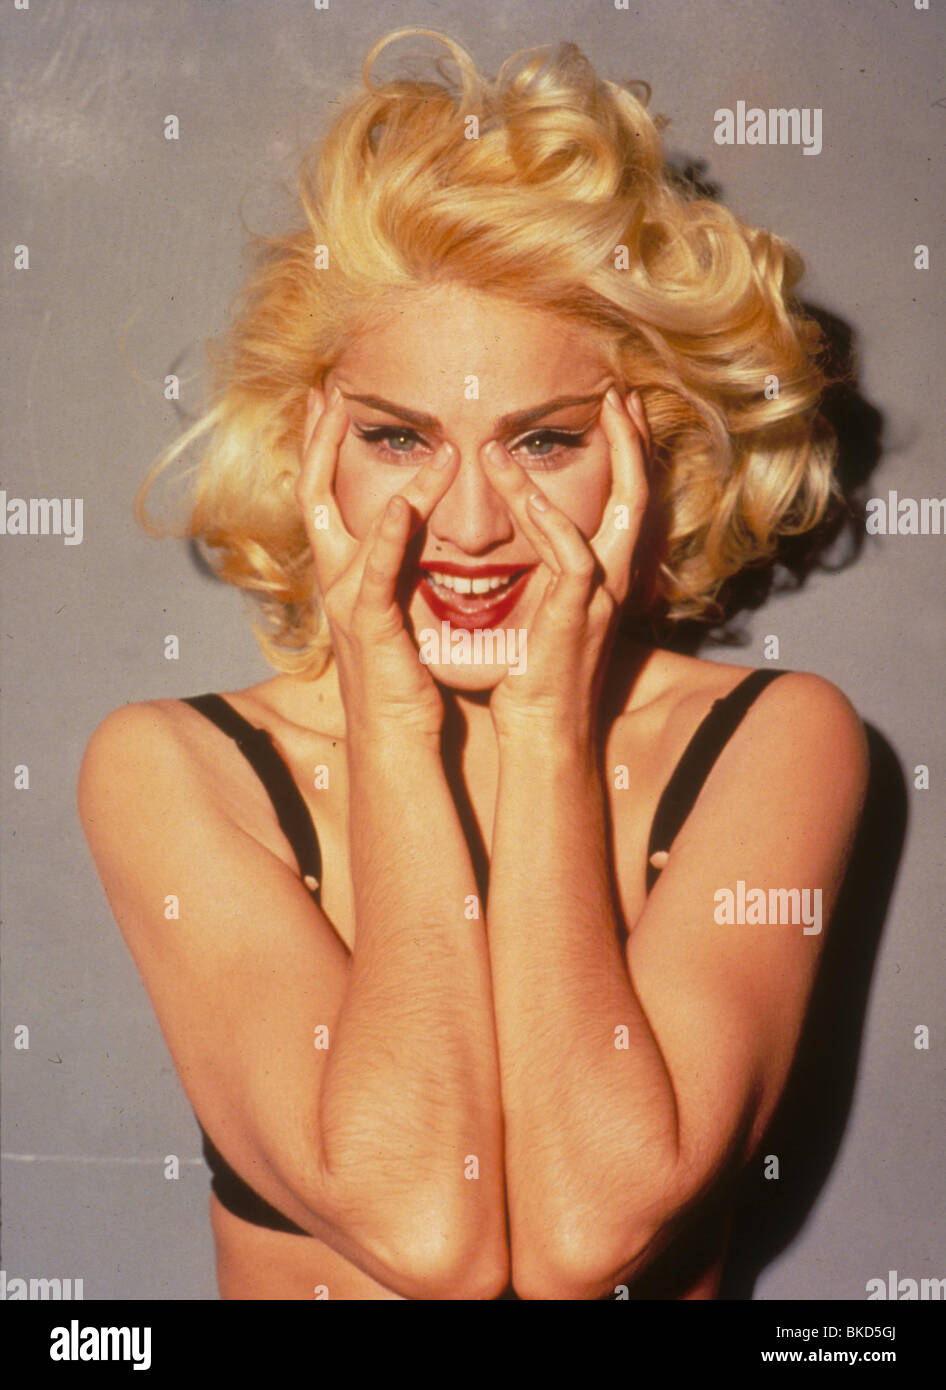 IN BED WITH MADONNA (1991) MADONNA IBM 029 Stock Photo - Alamy